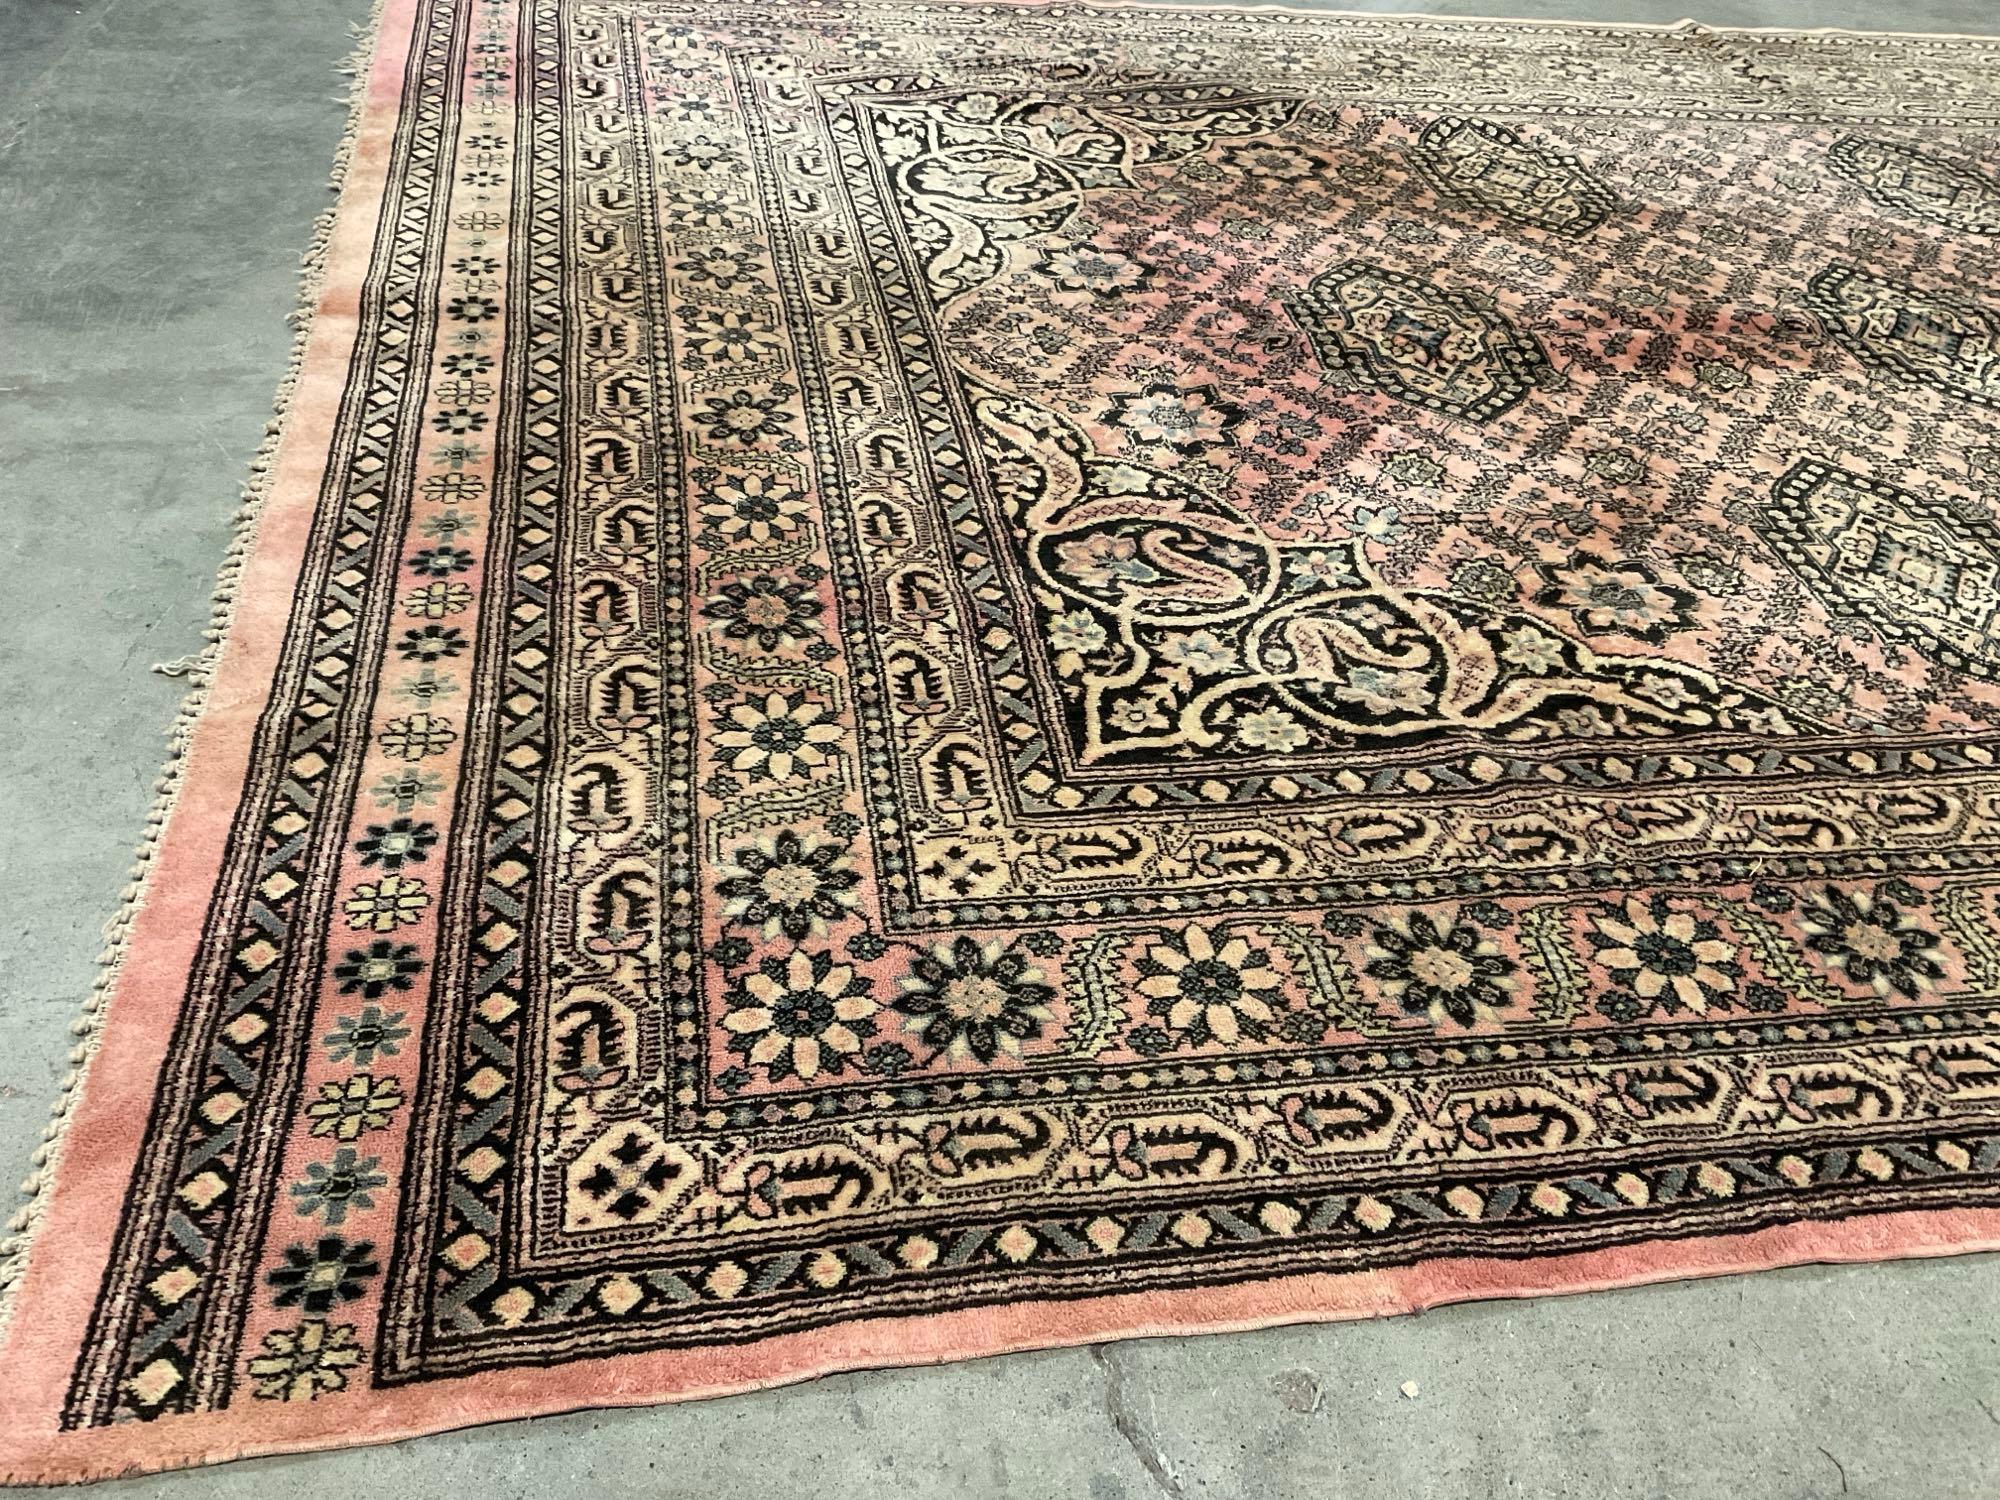 Hand Knotted Pale Red Persian Rug w/ Floral Patterns, 9.5 x 5 foot